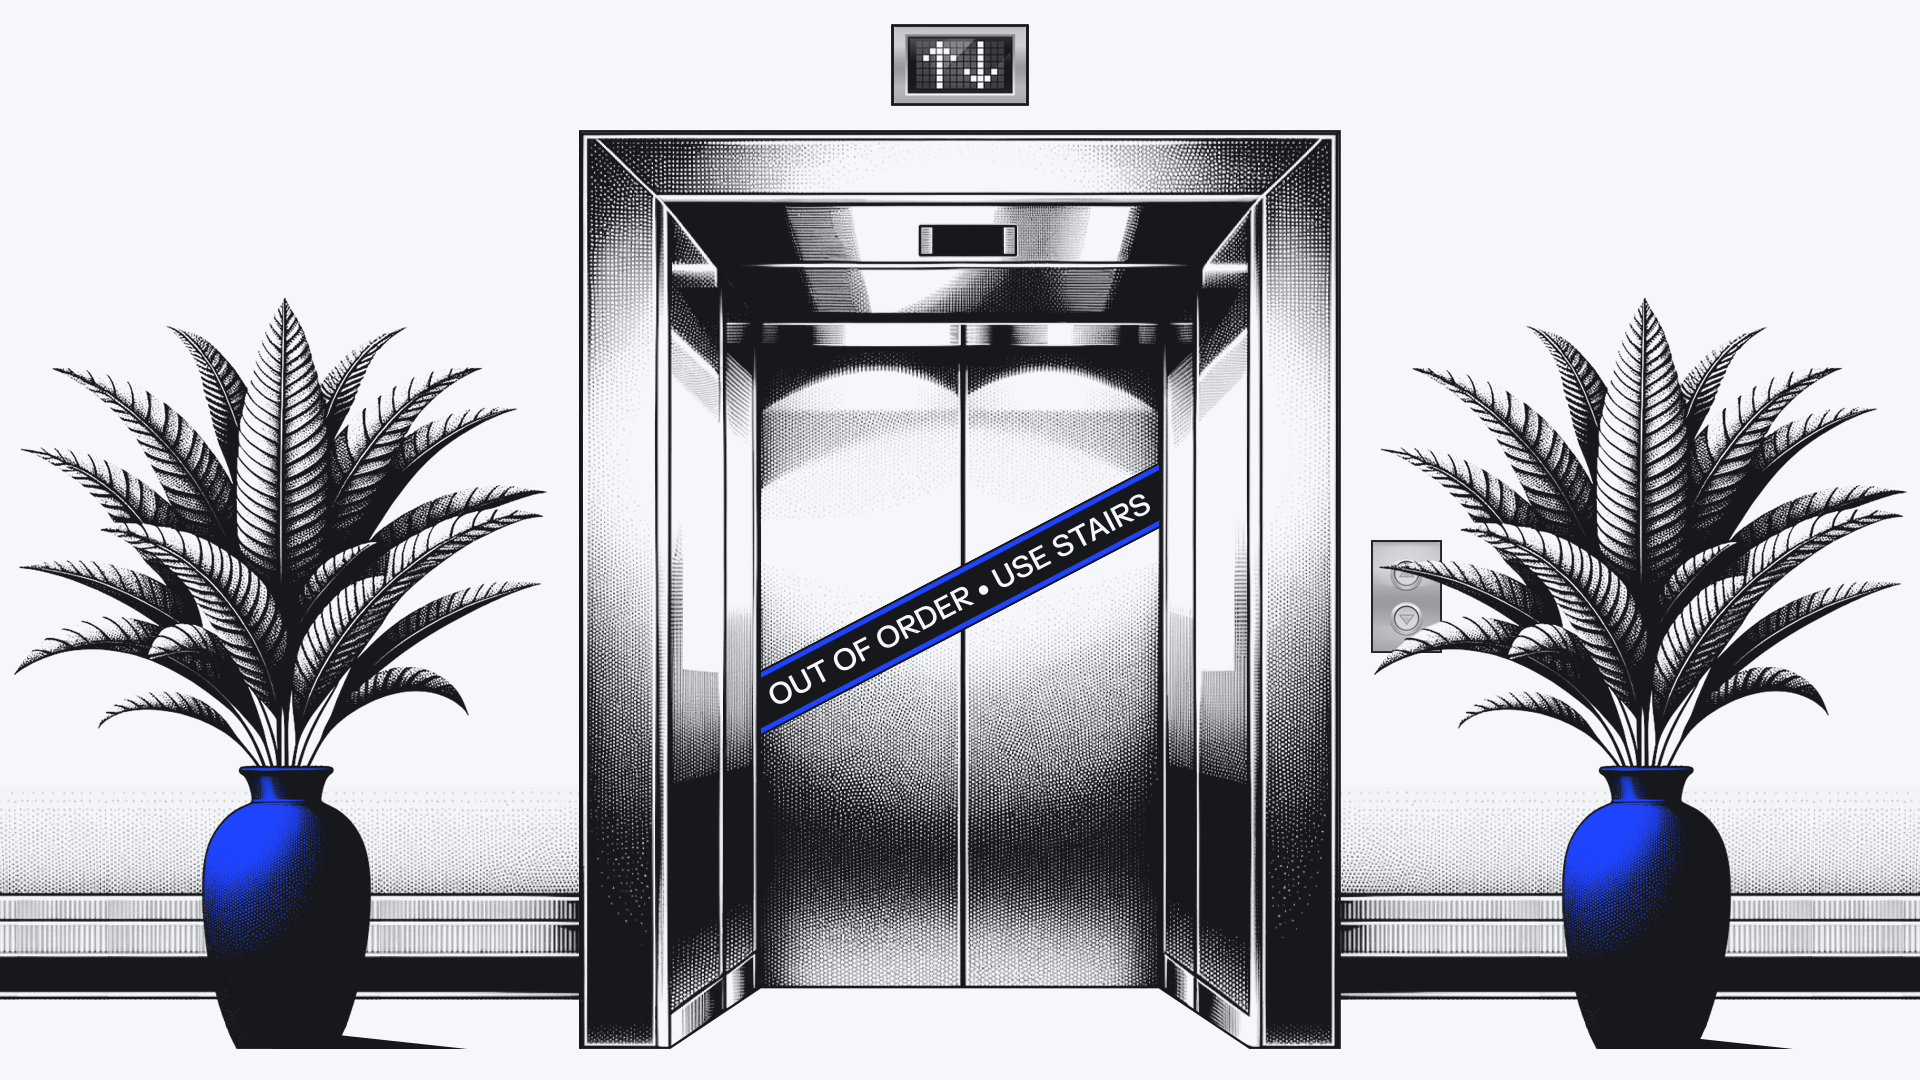 An illustration of an out-of-order elevator with a sign and two plants in blue vases beside it.